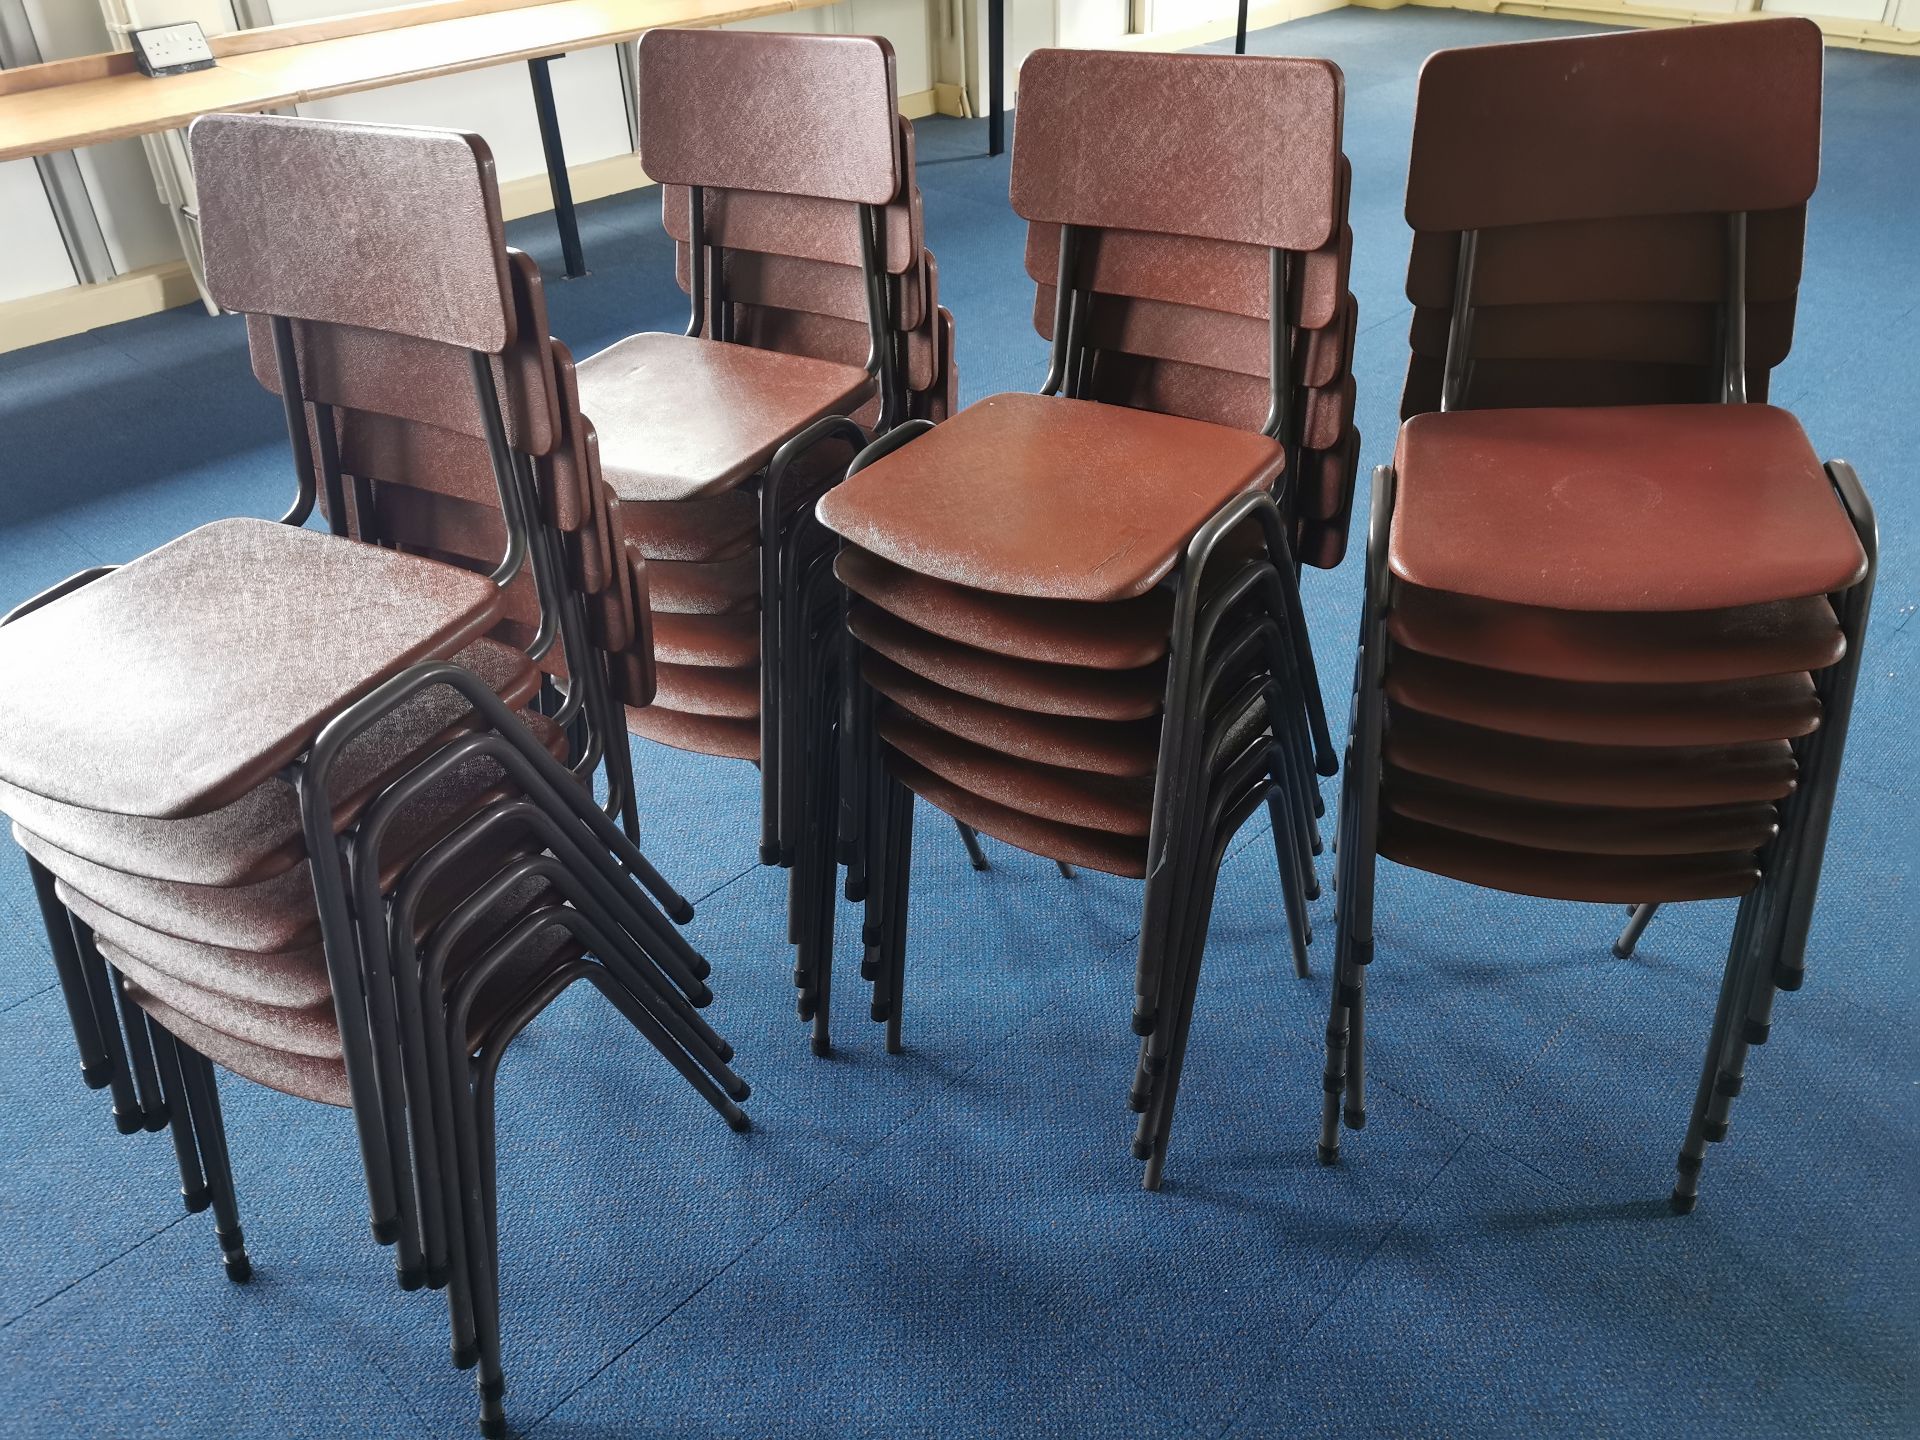 24x Vintage classroom chairs